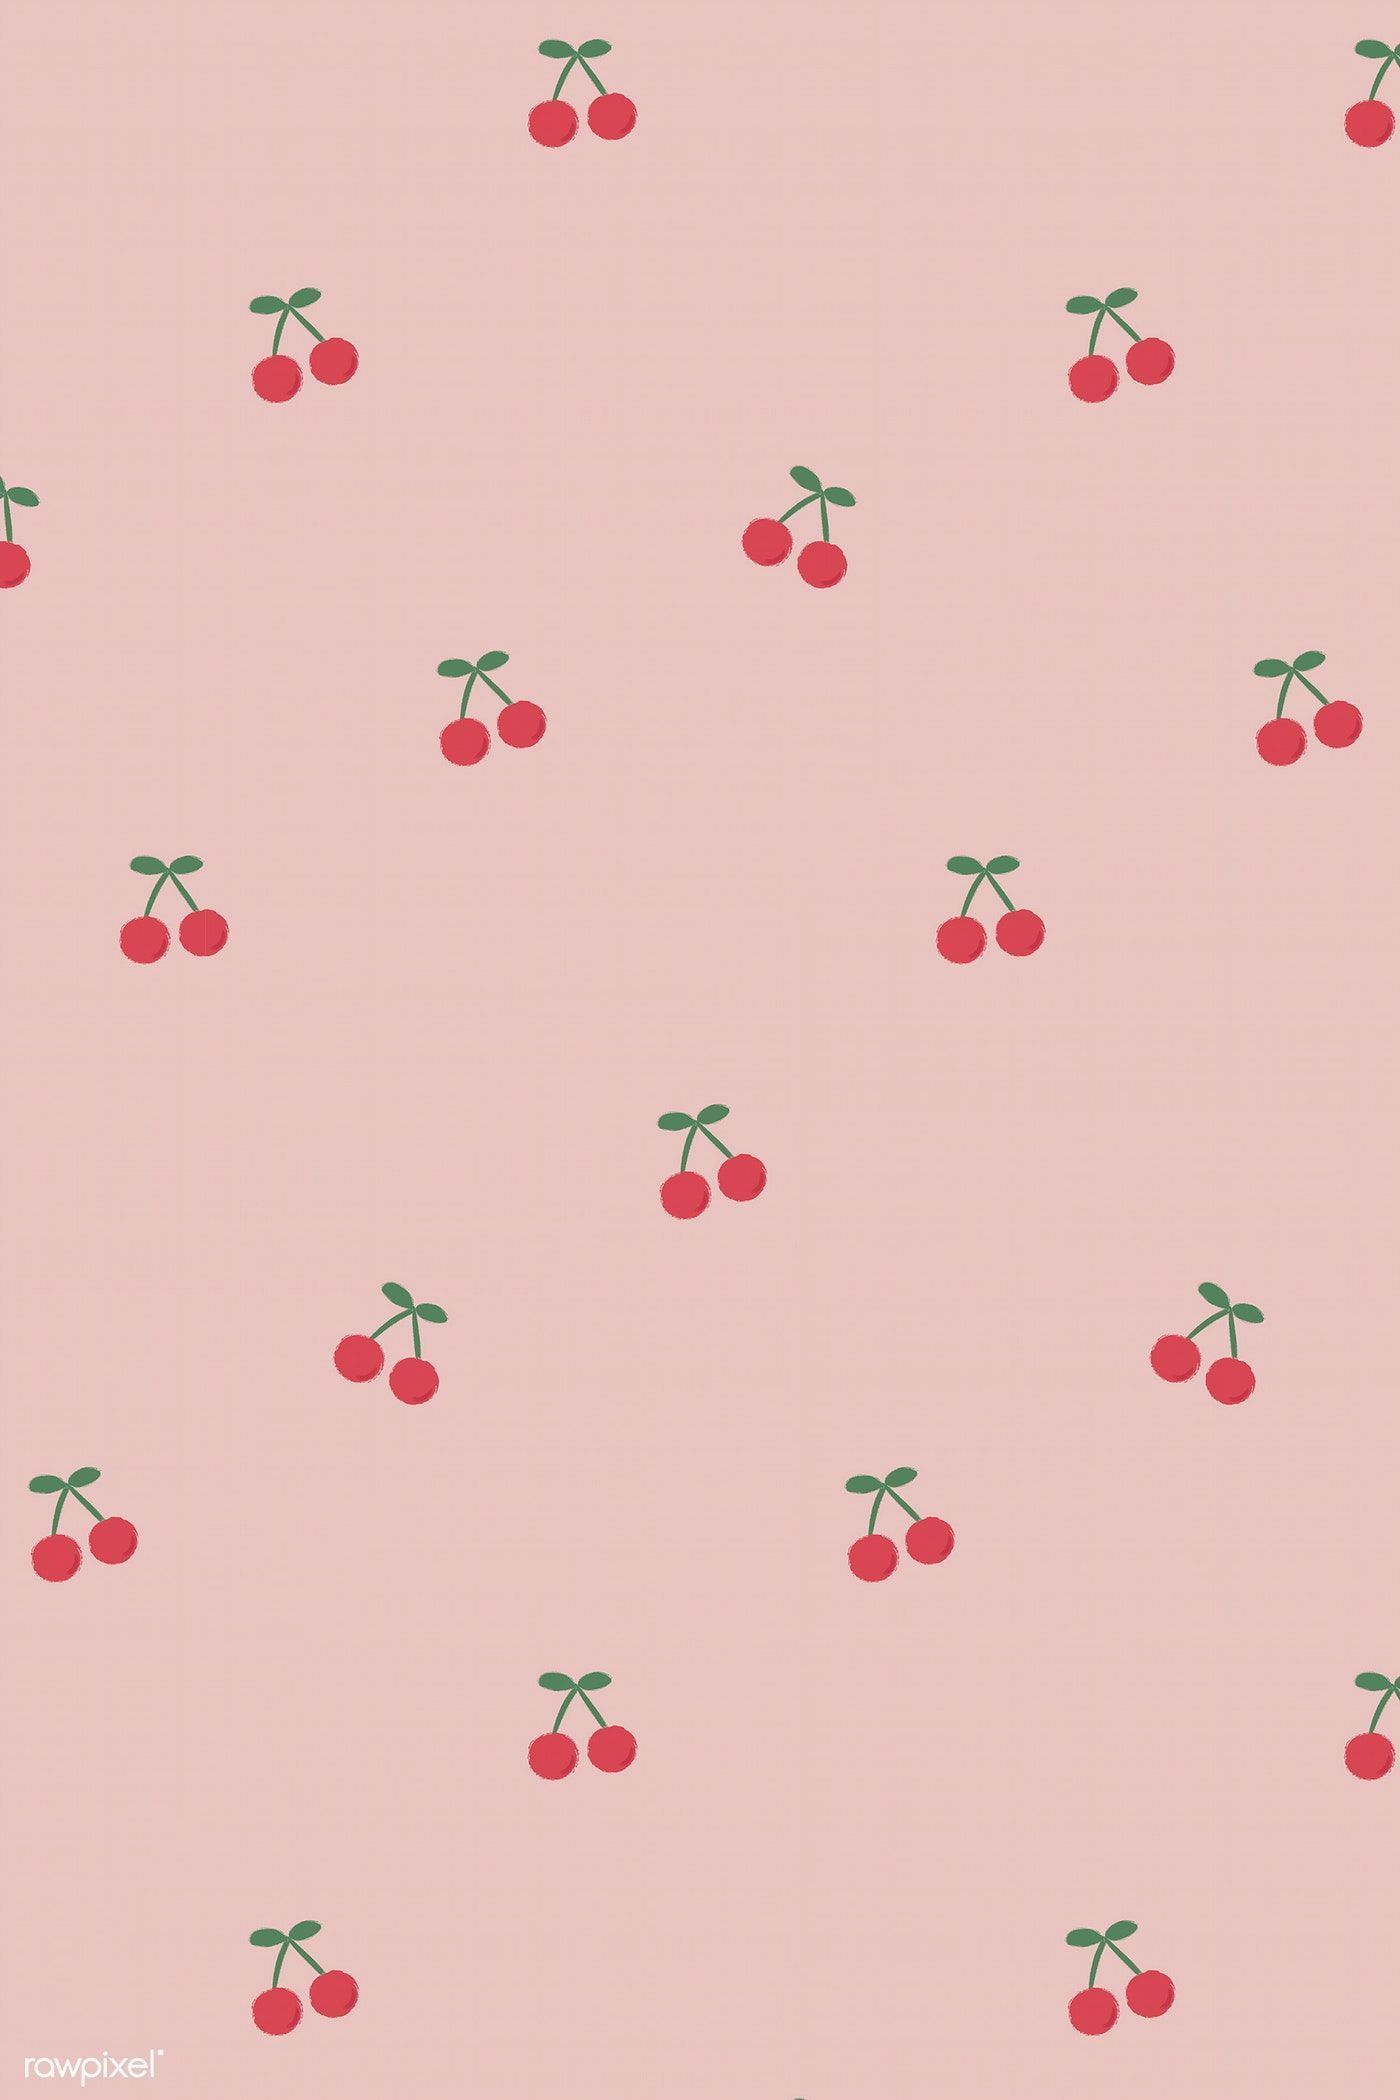 Red hand drawn cherry seamless pattern on pink social vector. premium image by. iPhone background wallpaper, Aesthetic iphone wallpaper, Fruit wallpaper